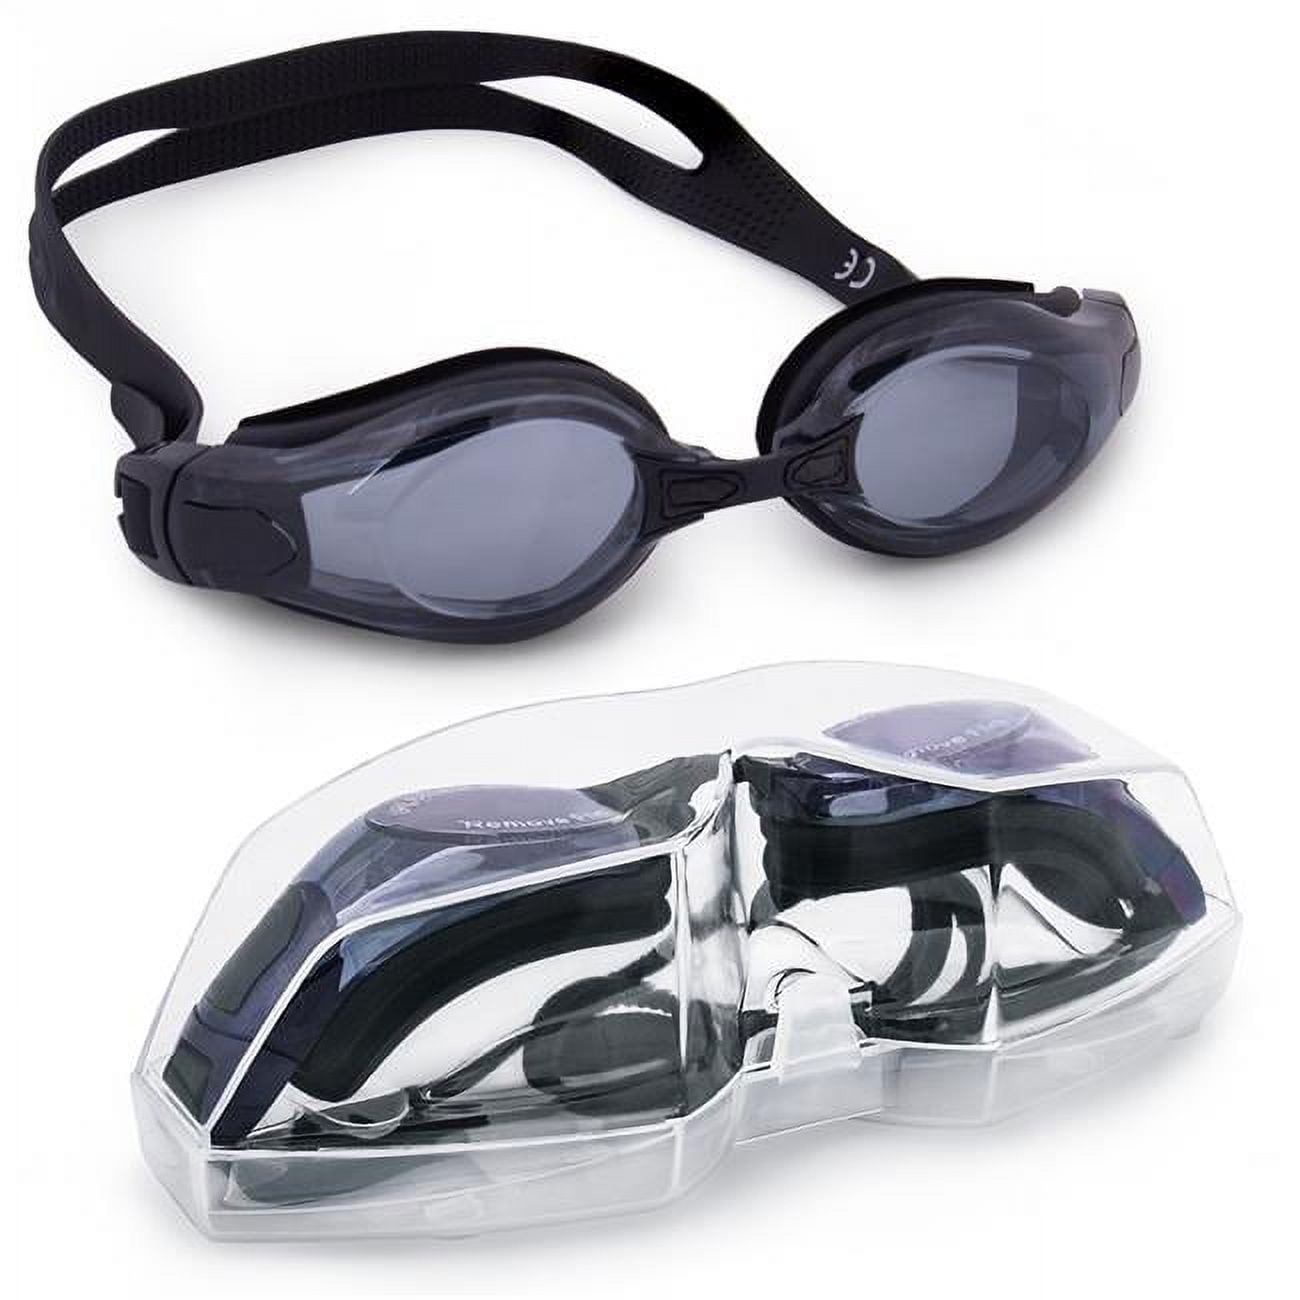 Picture of Brybelly SSWI-107 Clear Swimming Goggles with Case, Black